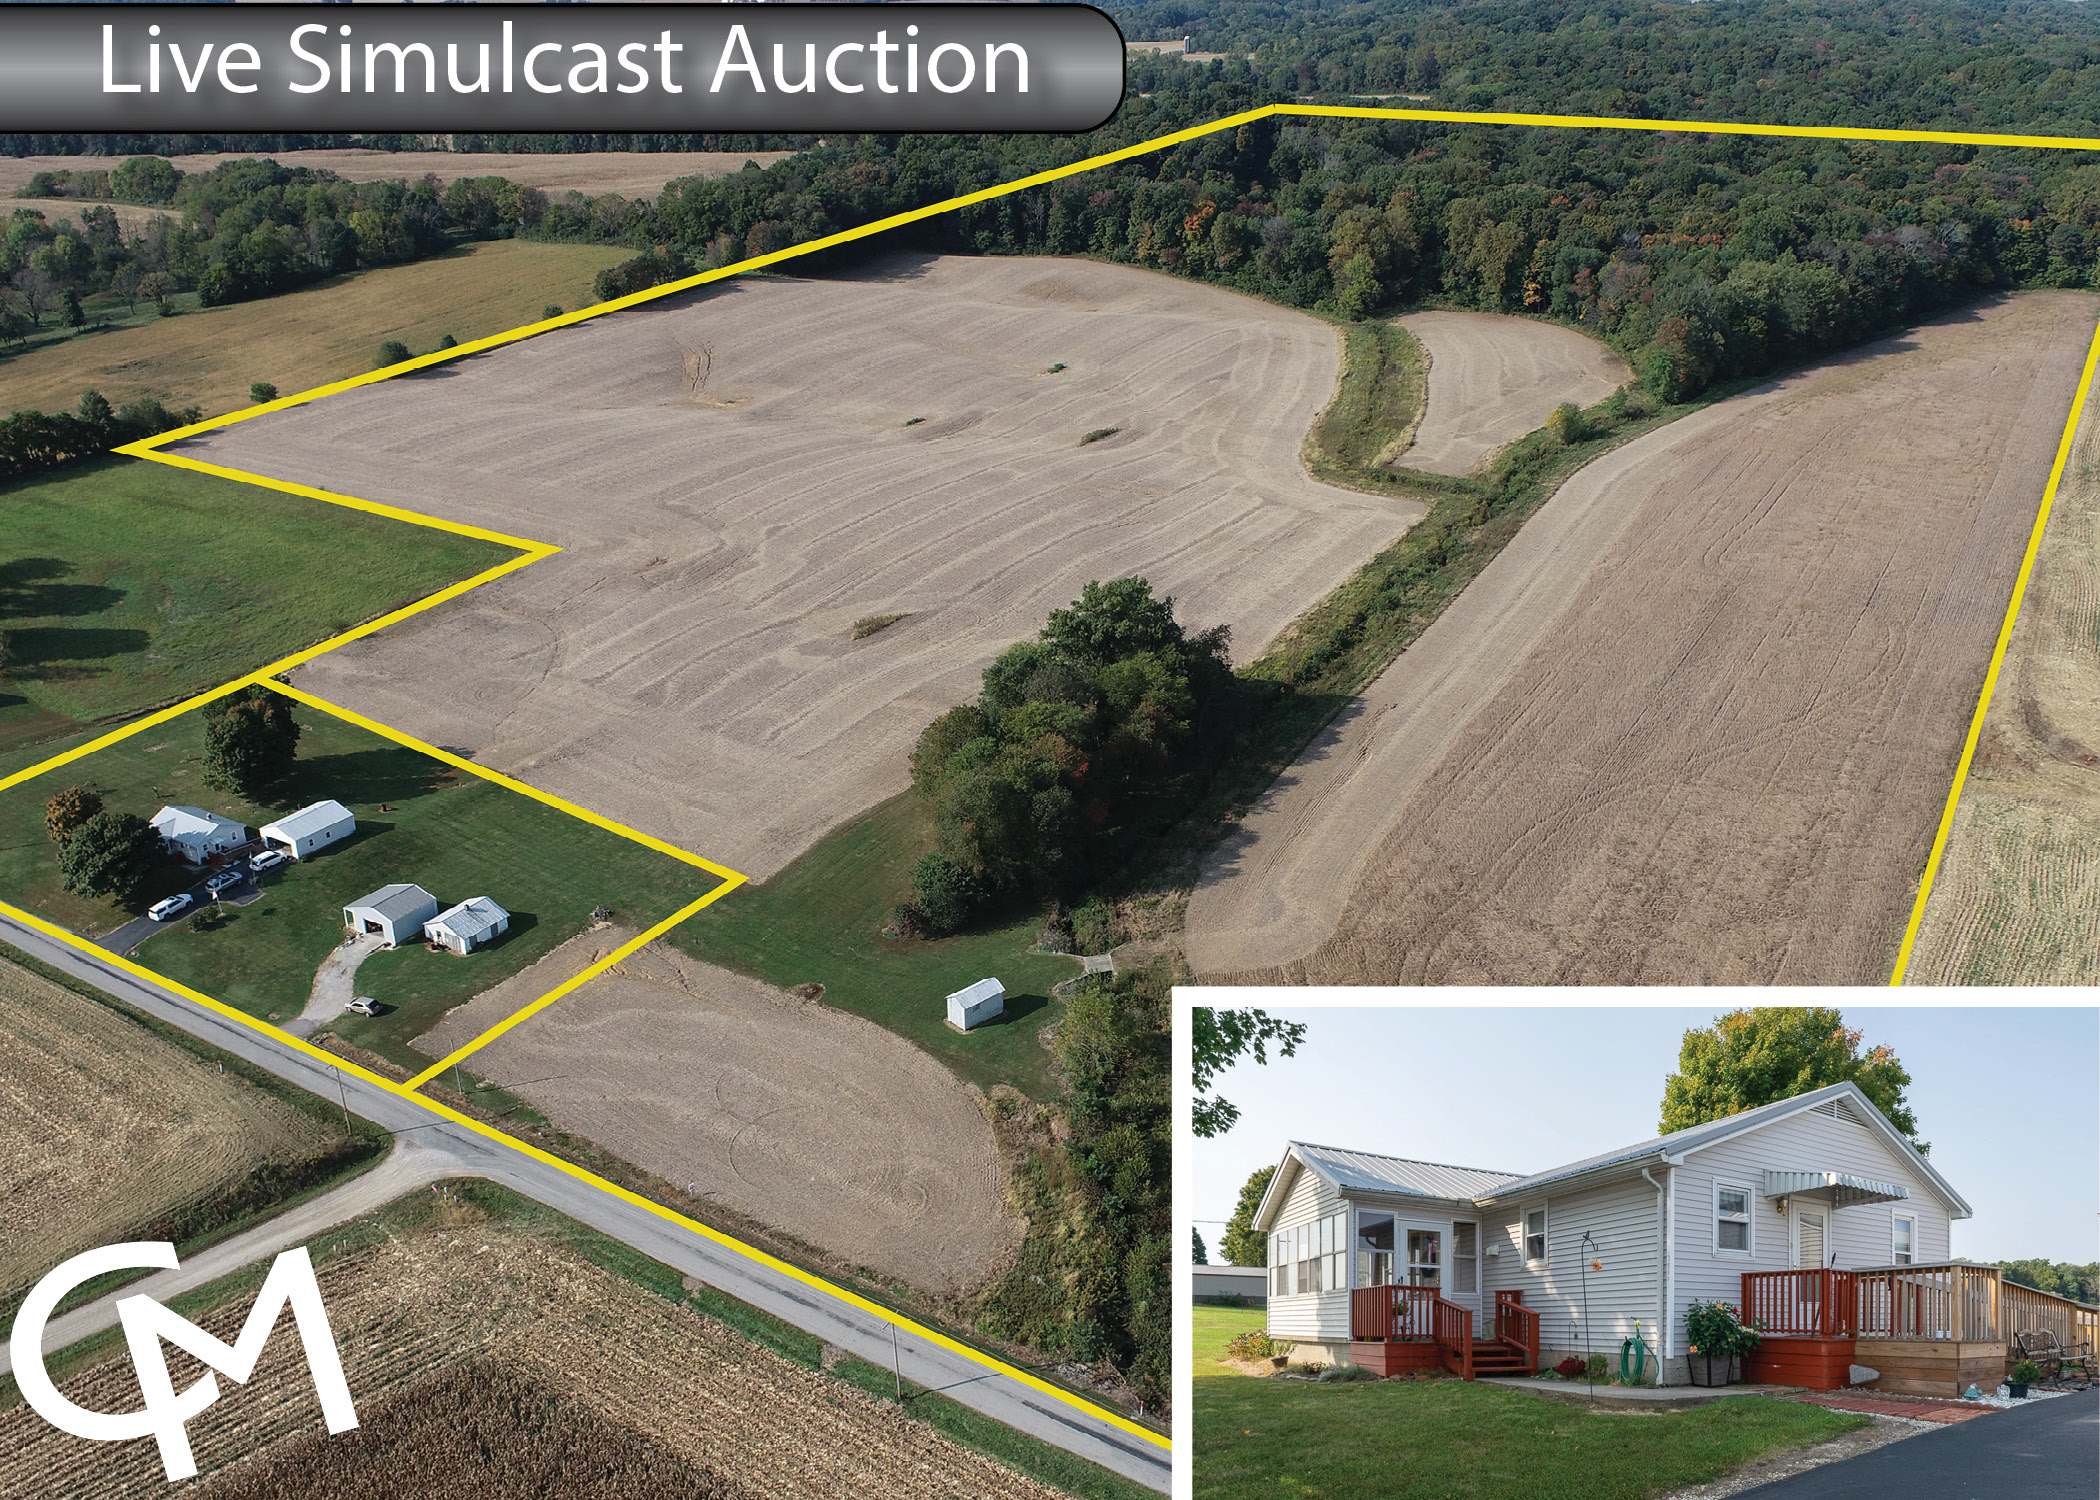 Gibson County, Land Auction, Home for Sale, Francisco Indiana